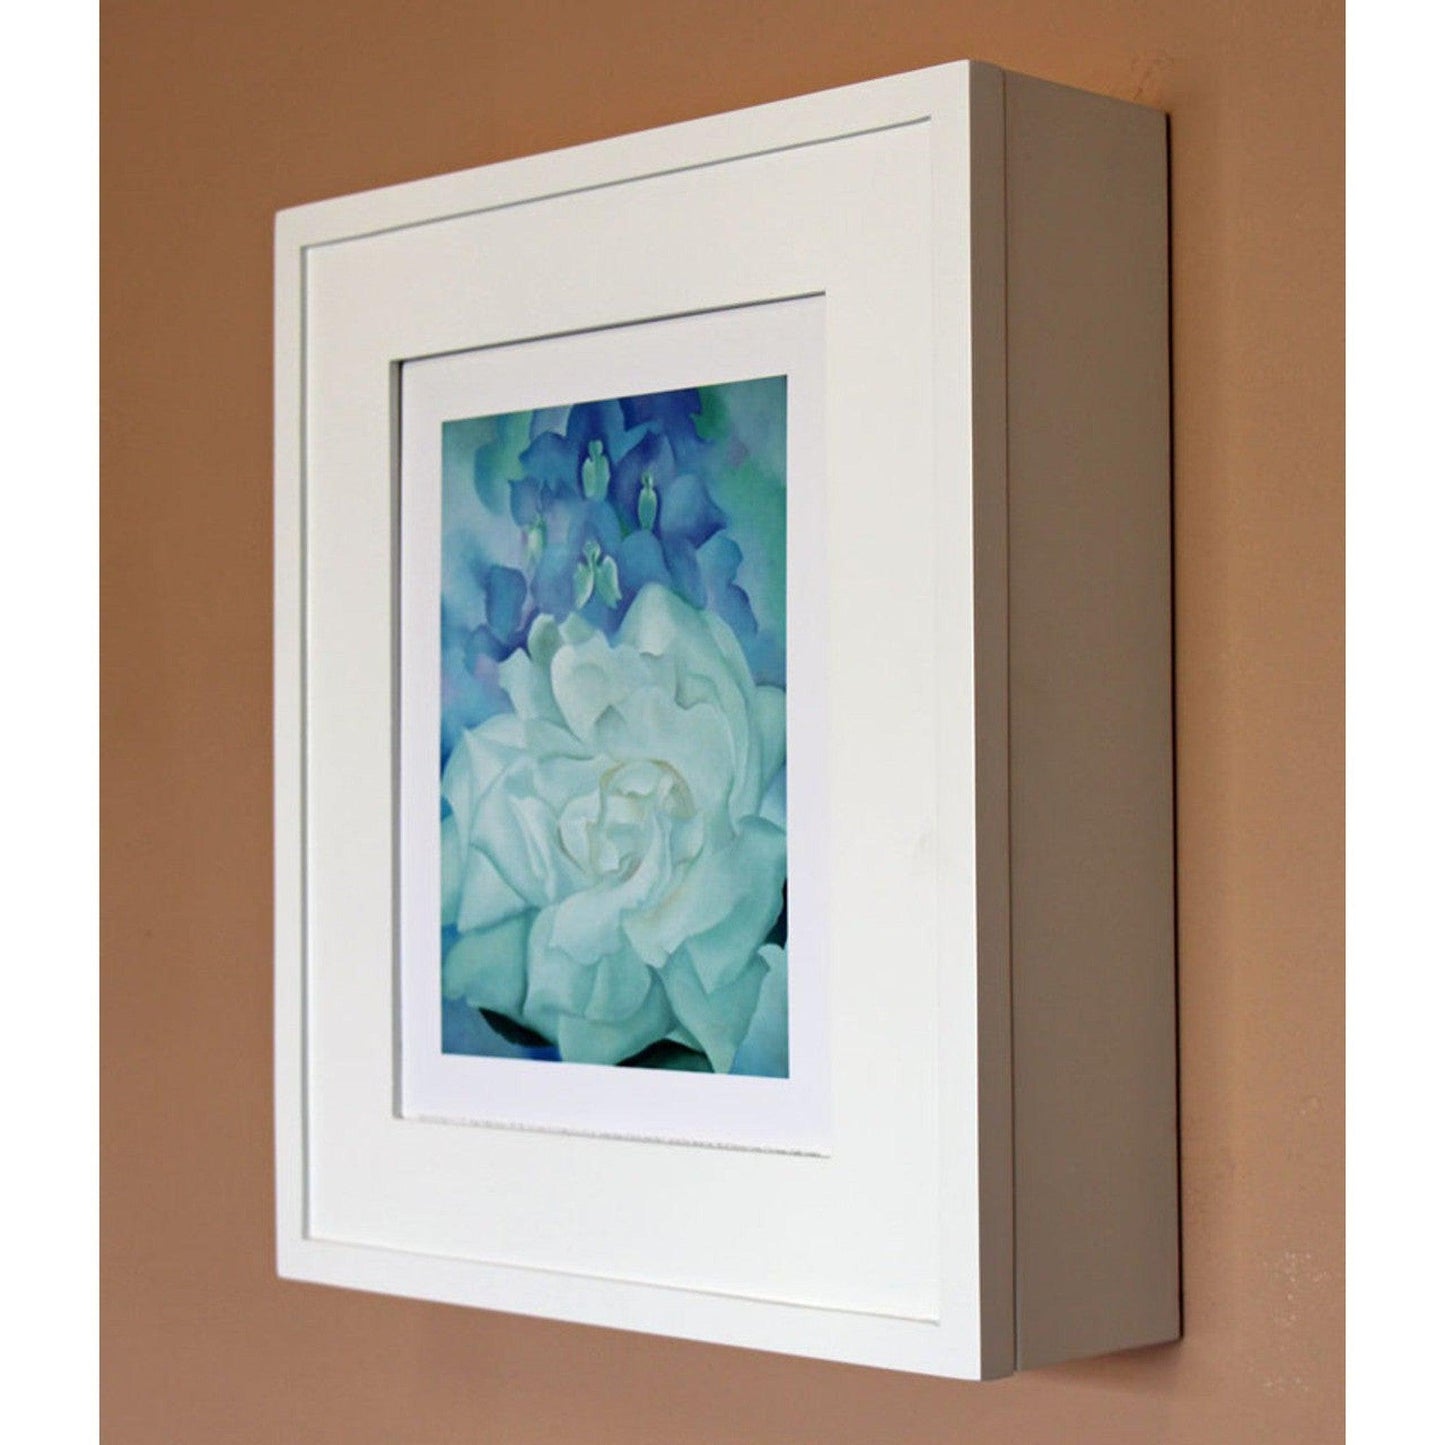 Fox Hollow Furnishings 20" x 17" White Contemporary Wall Mount Picture Frame Medicine Cabinet With Ivory 8" x 10" Cabinet